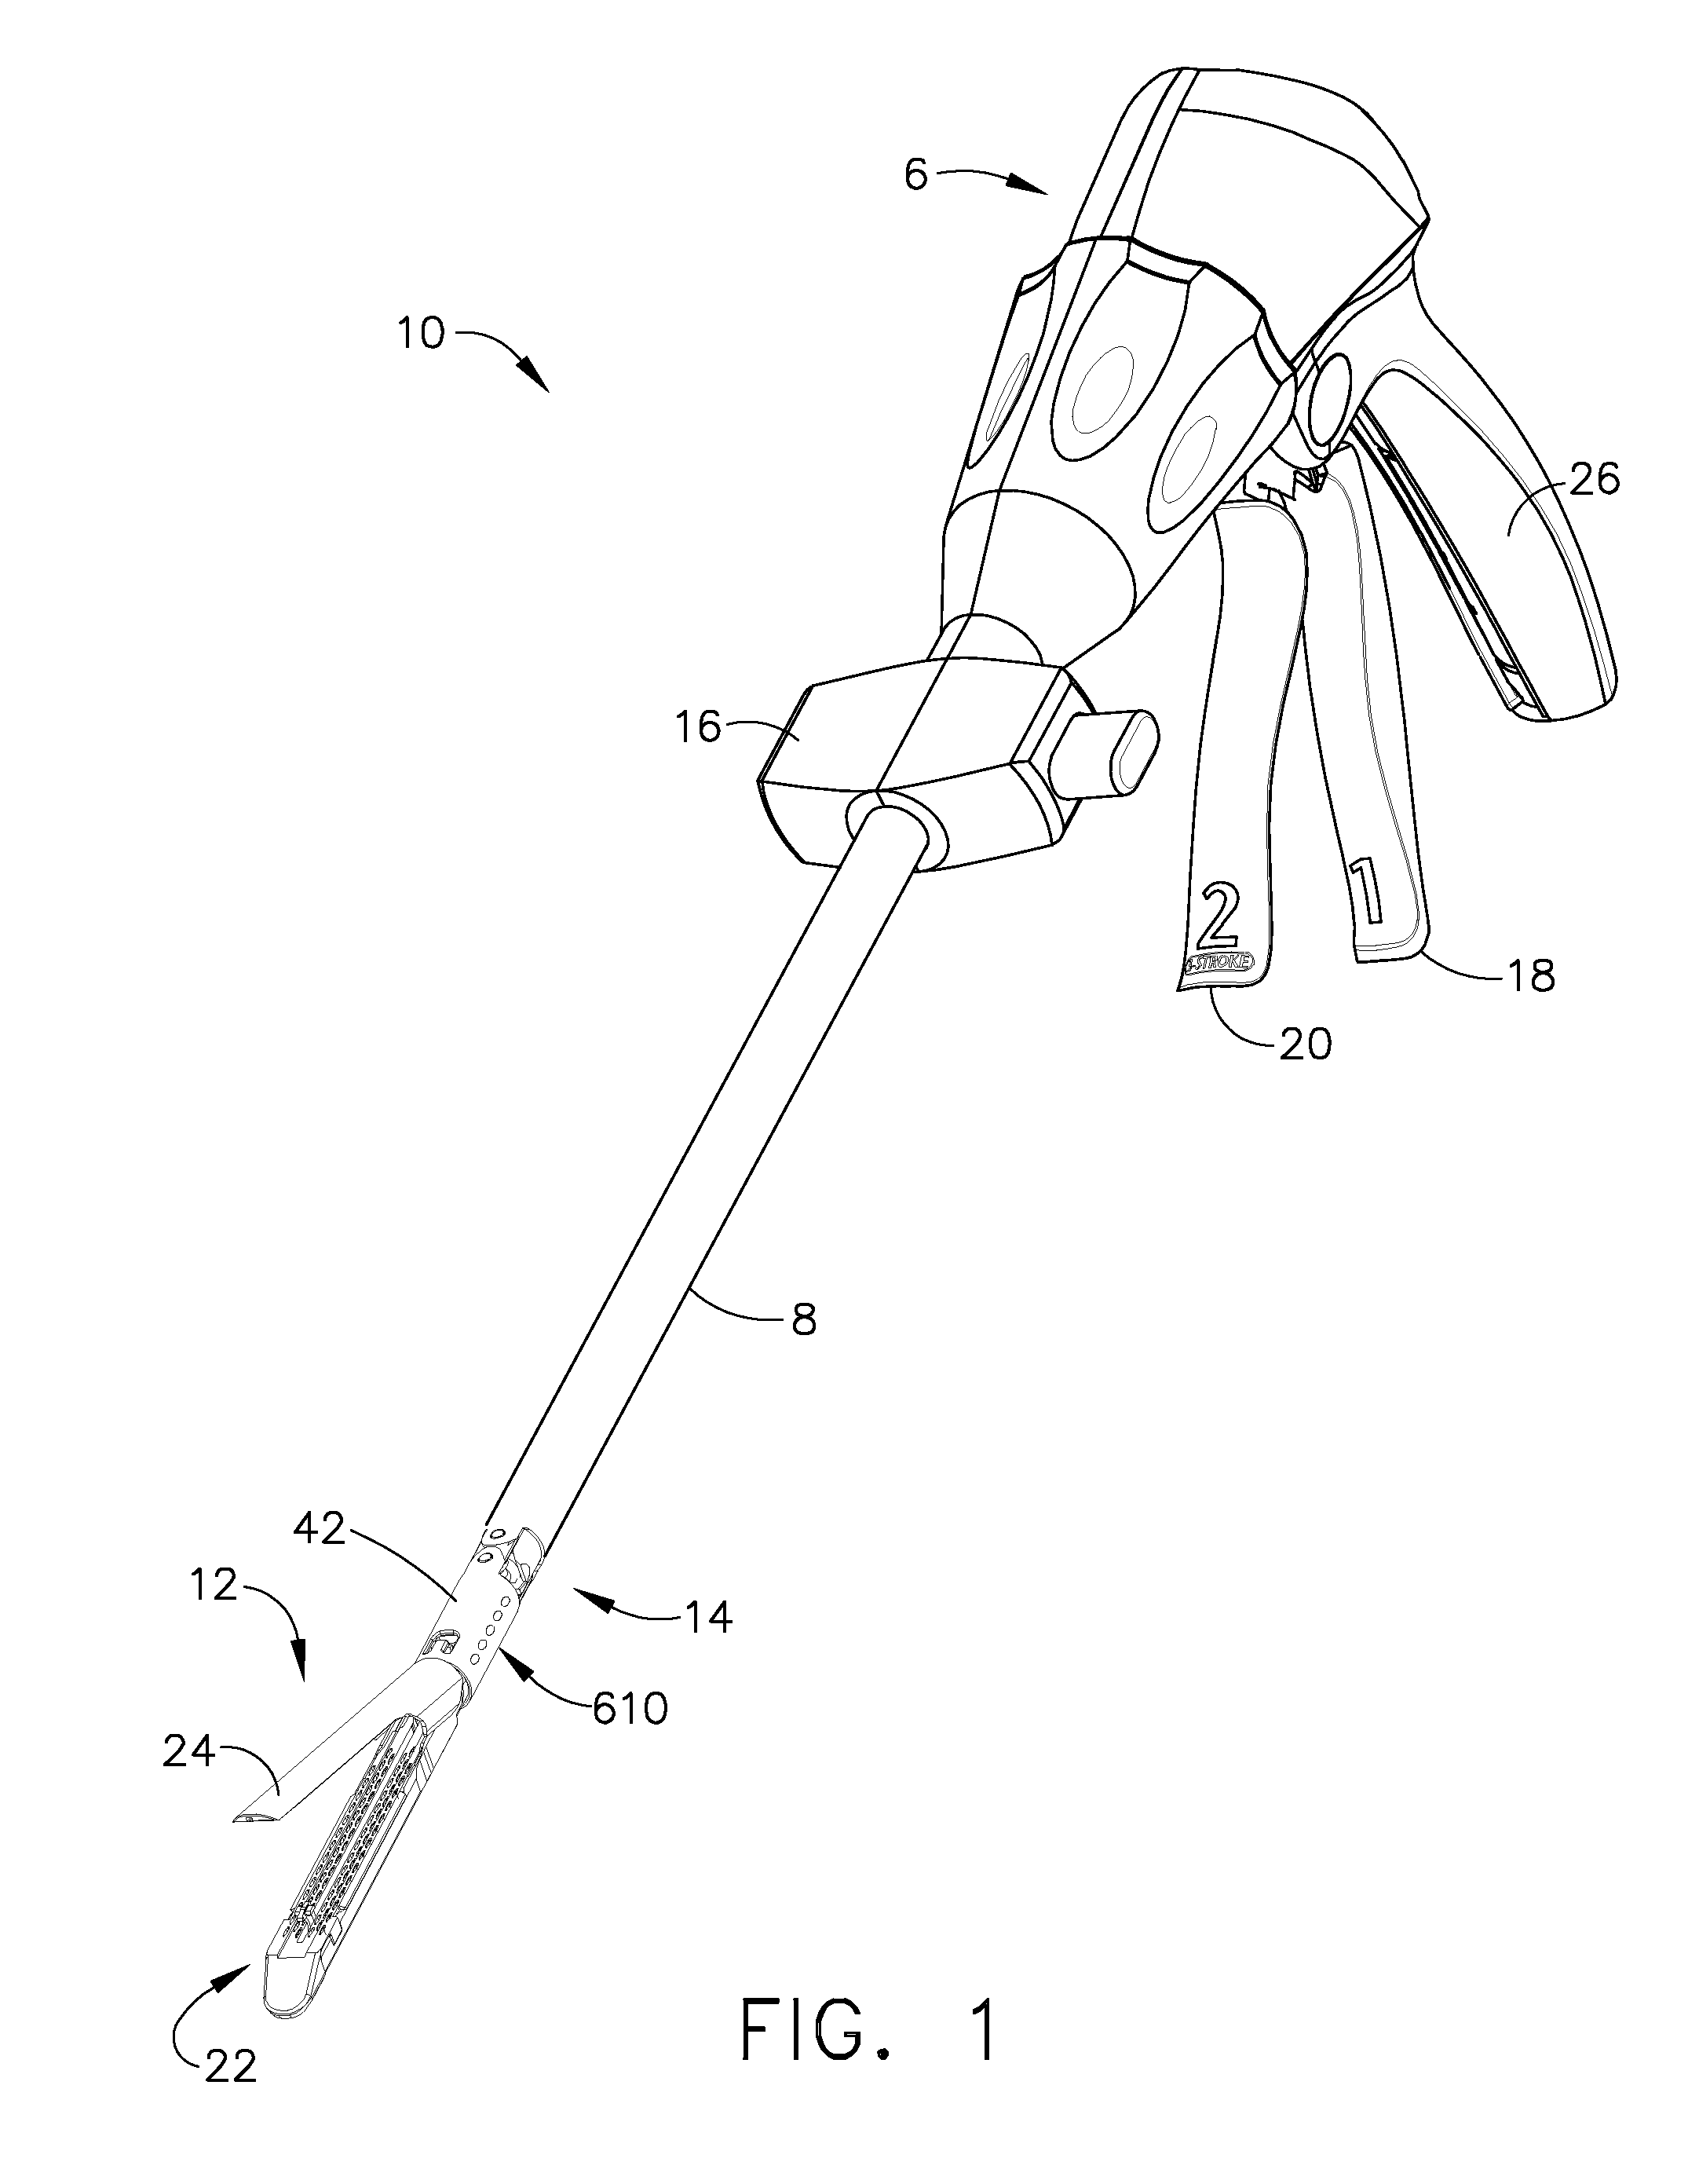 Surgical instrument with apparatus for measuring elapsed time between actions